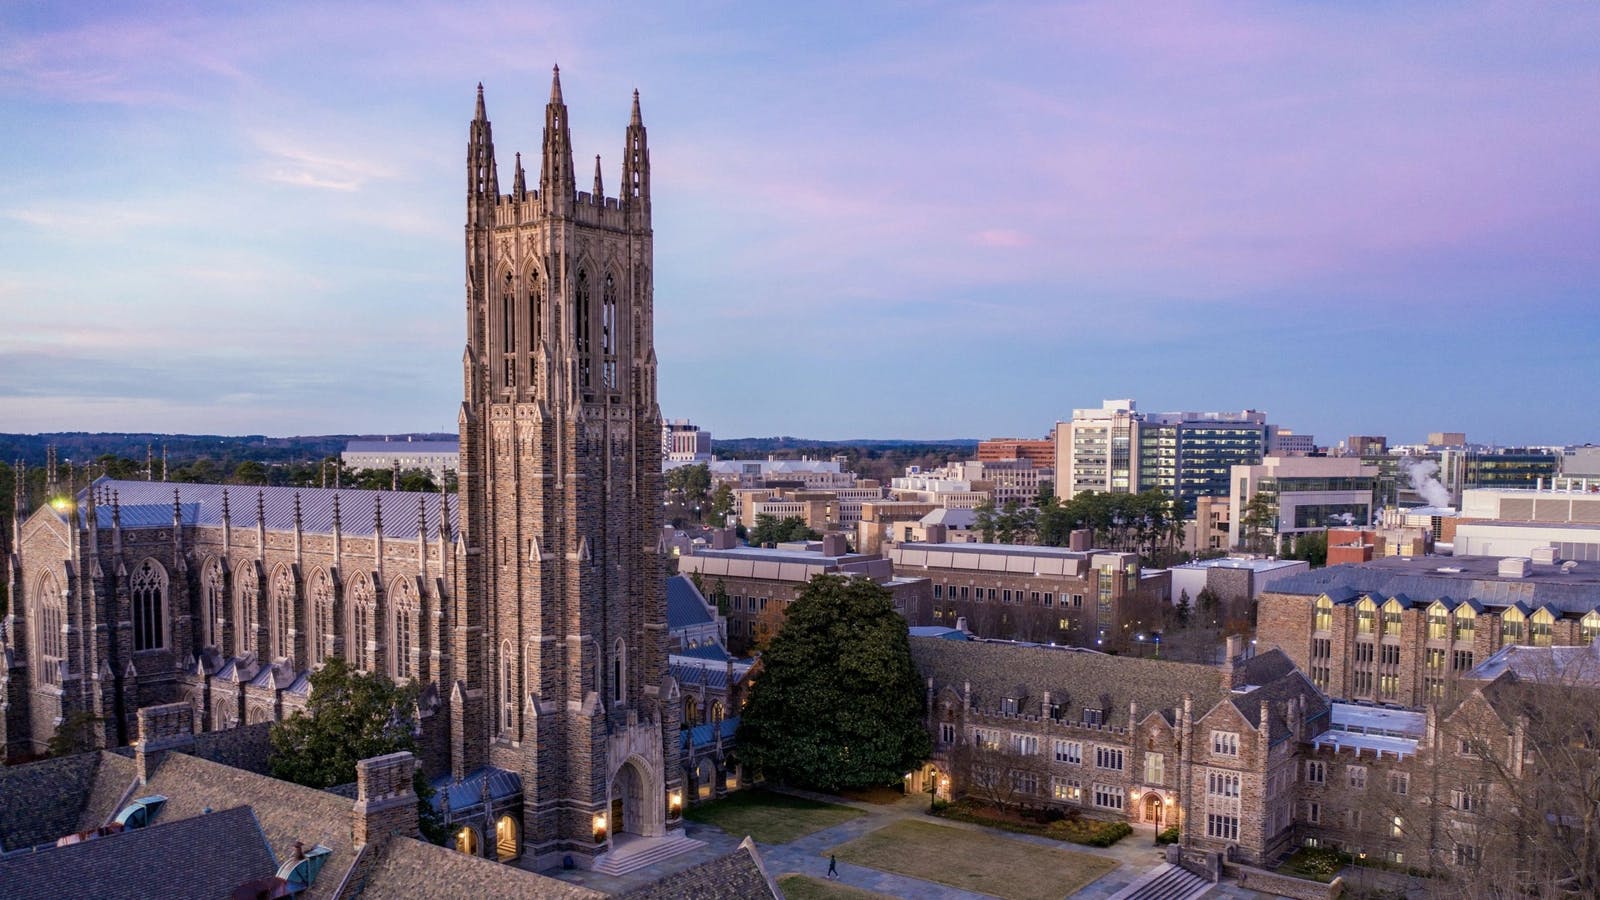 Hero image showing a picture of Duke University